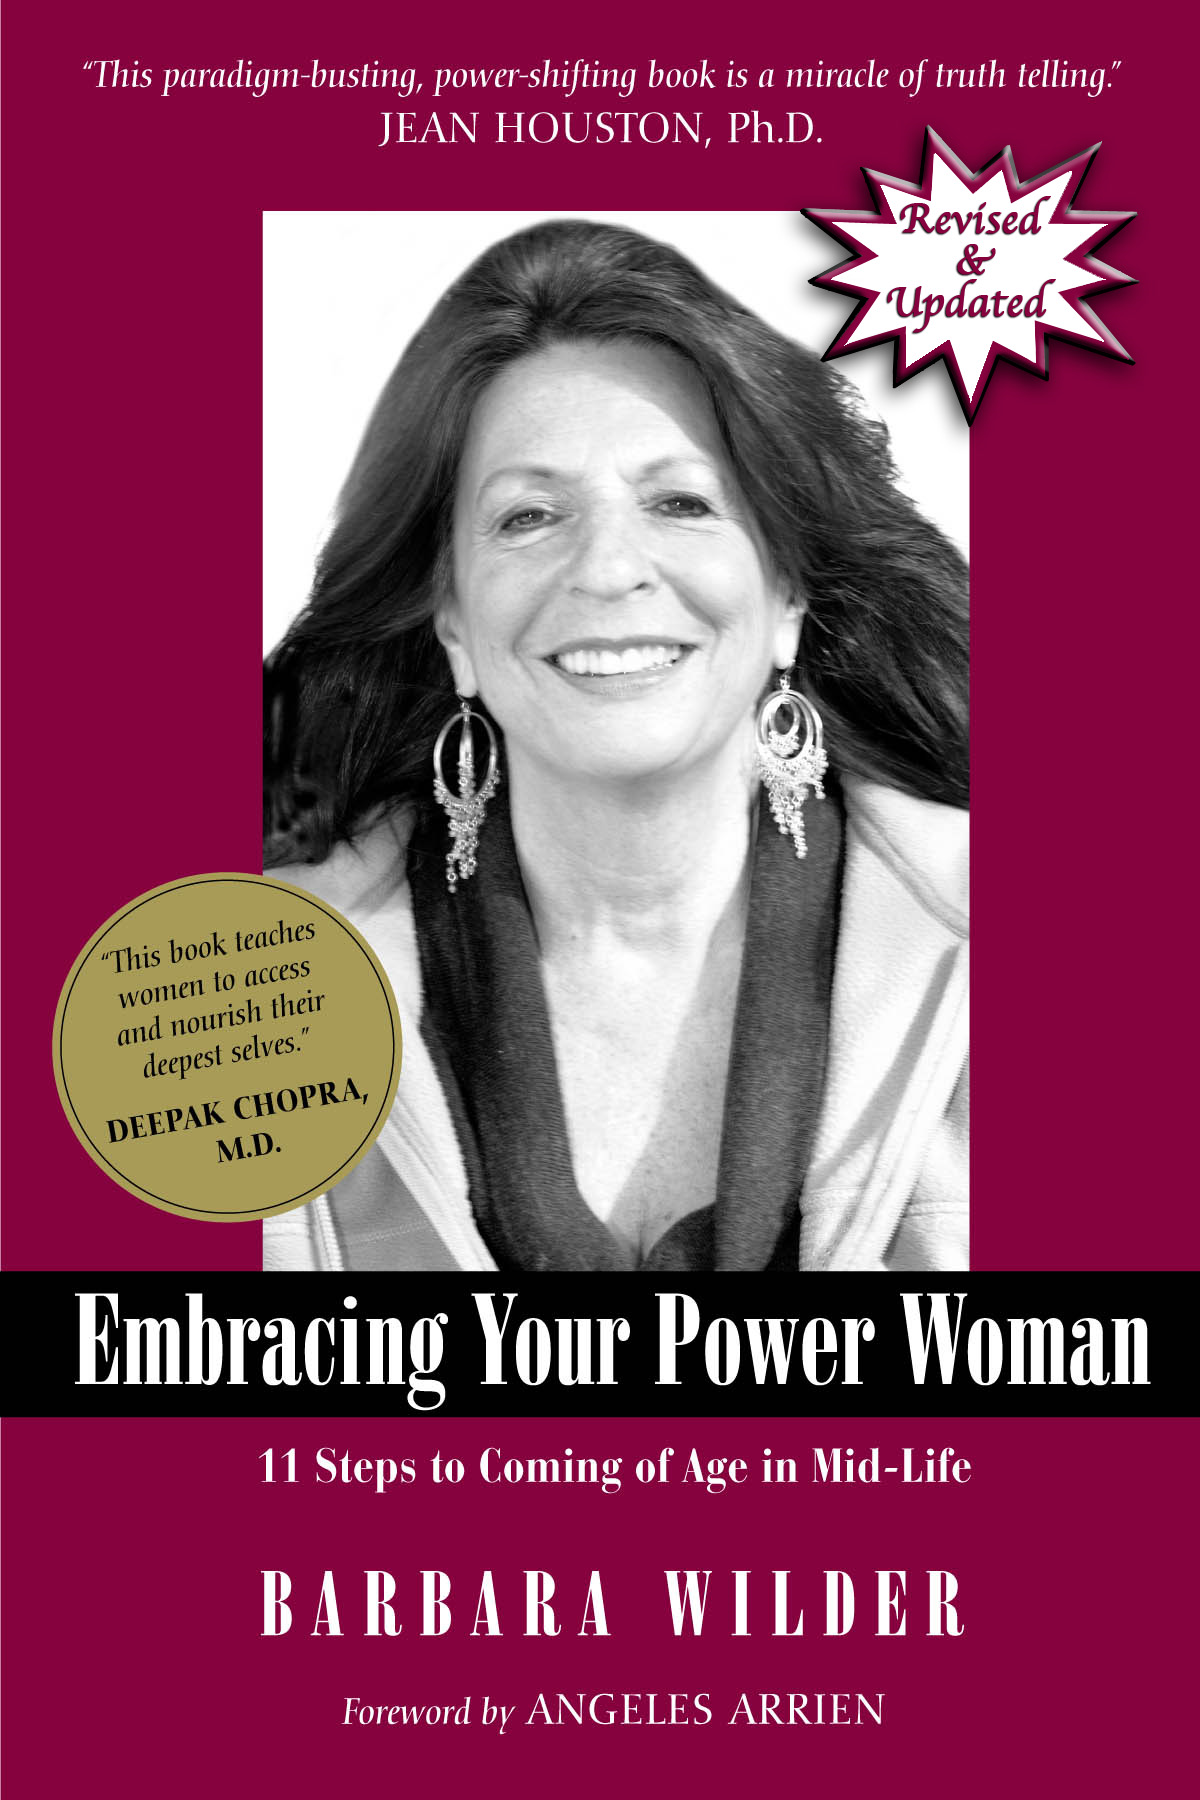 Embracing Your Power Woman book cover